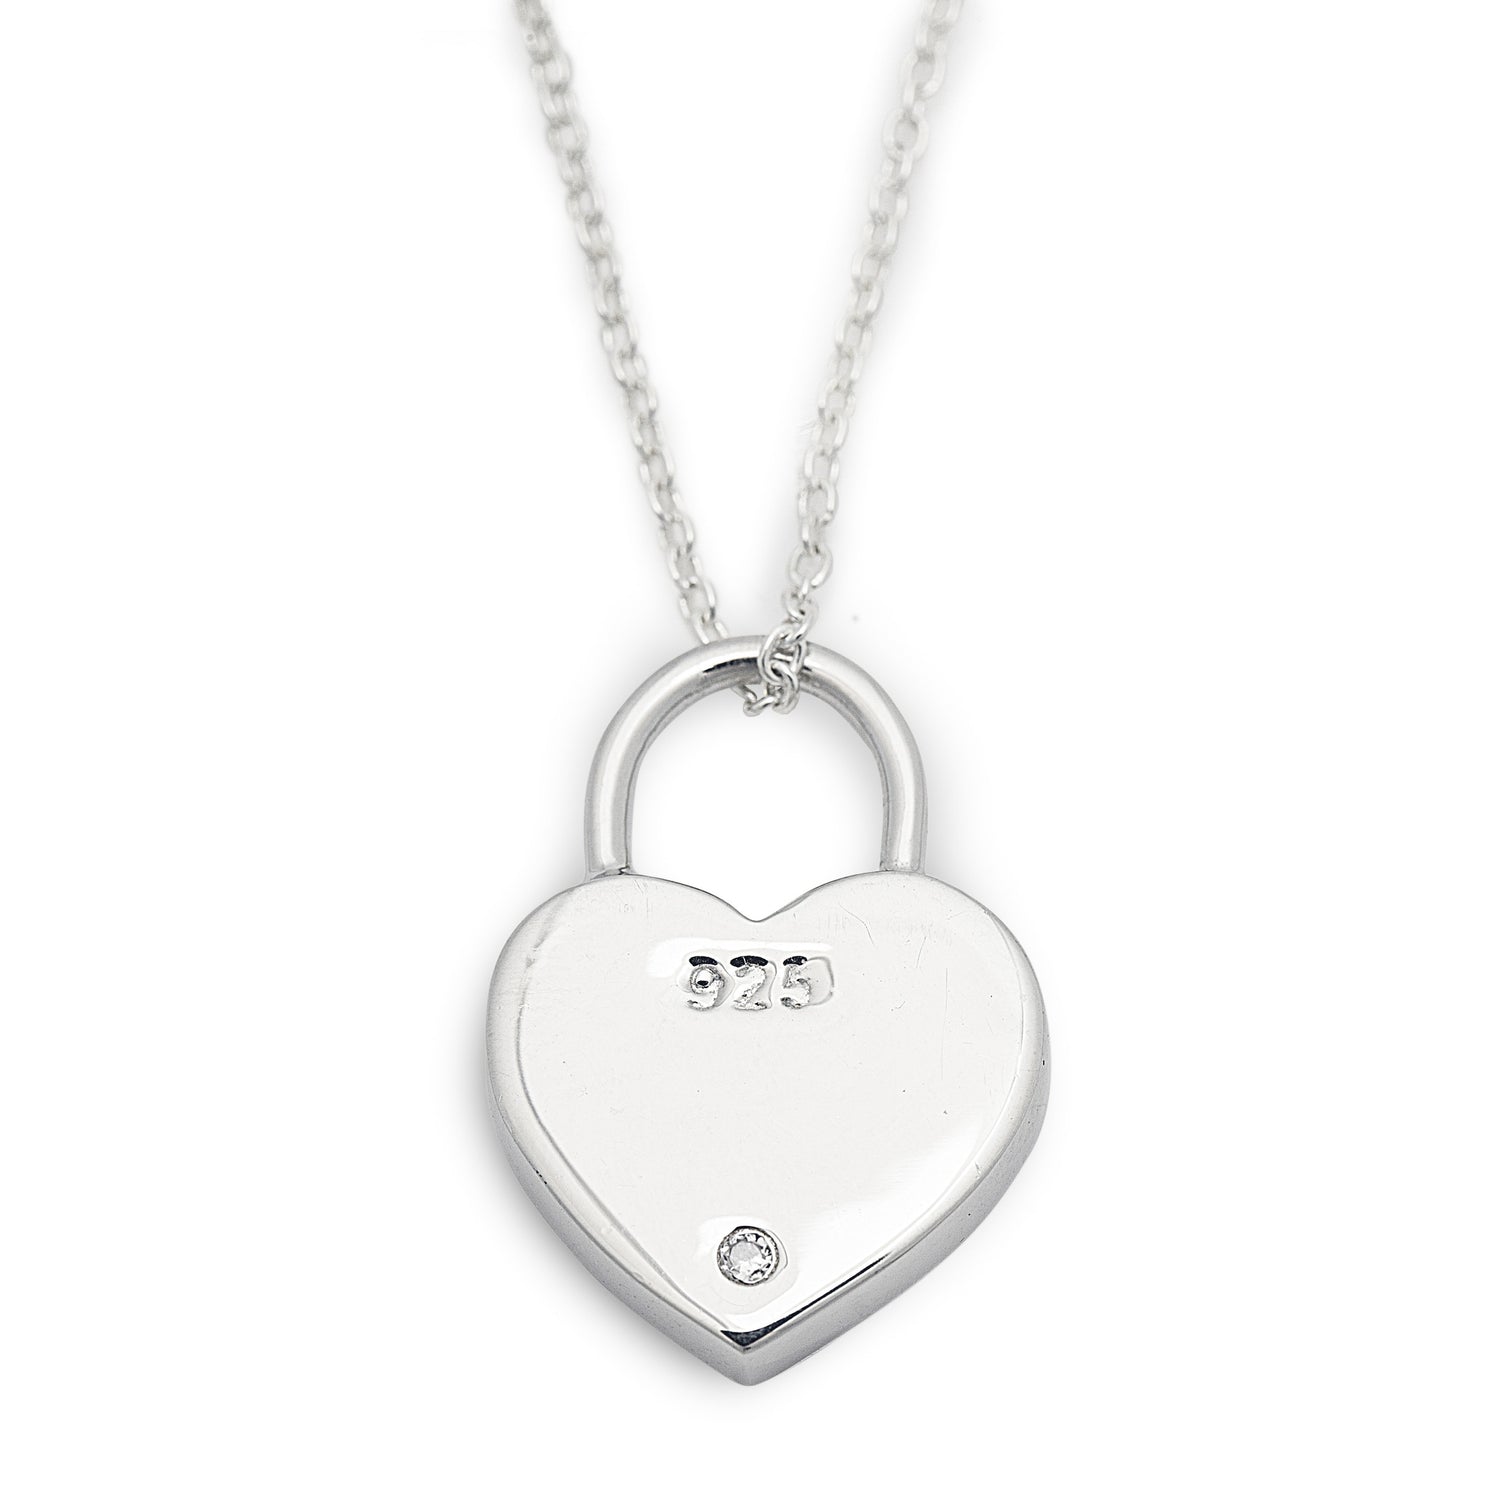 Locked Secrets Necklace - Dainty Heart shaped Padlock necklace stamped with 925 Sterling Silver and Cubic Zirconia. Worldwide shipping. Affordable luxury jewellery by Bellagio & Co.